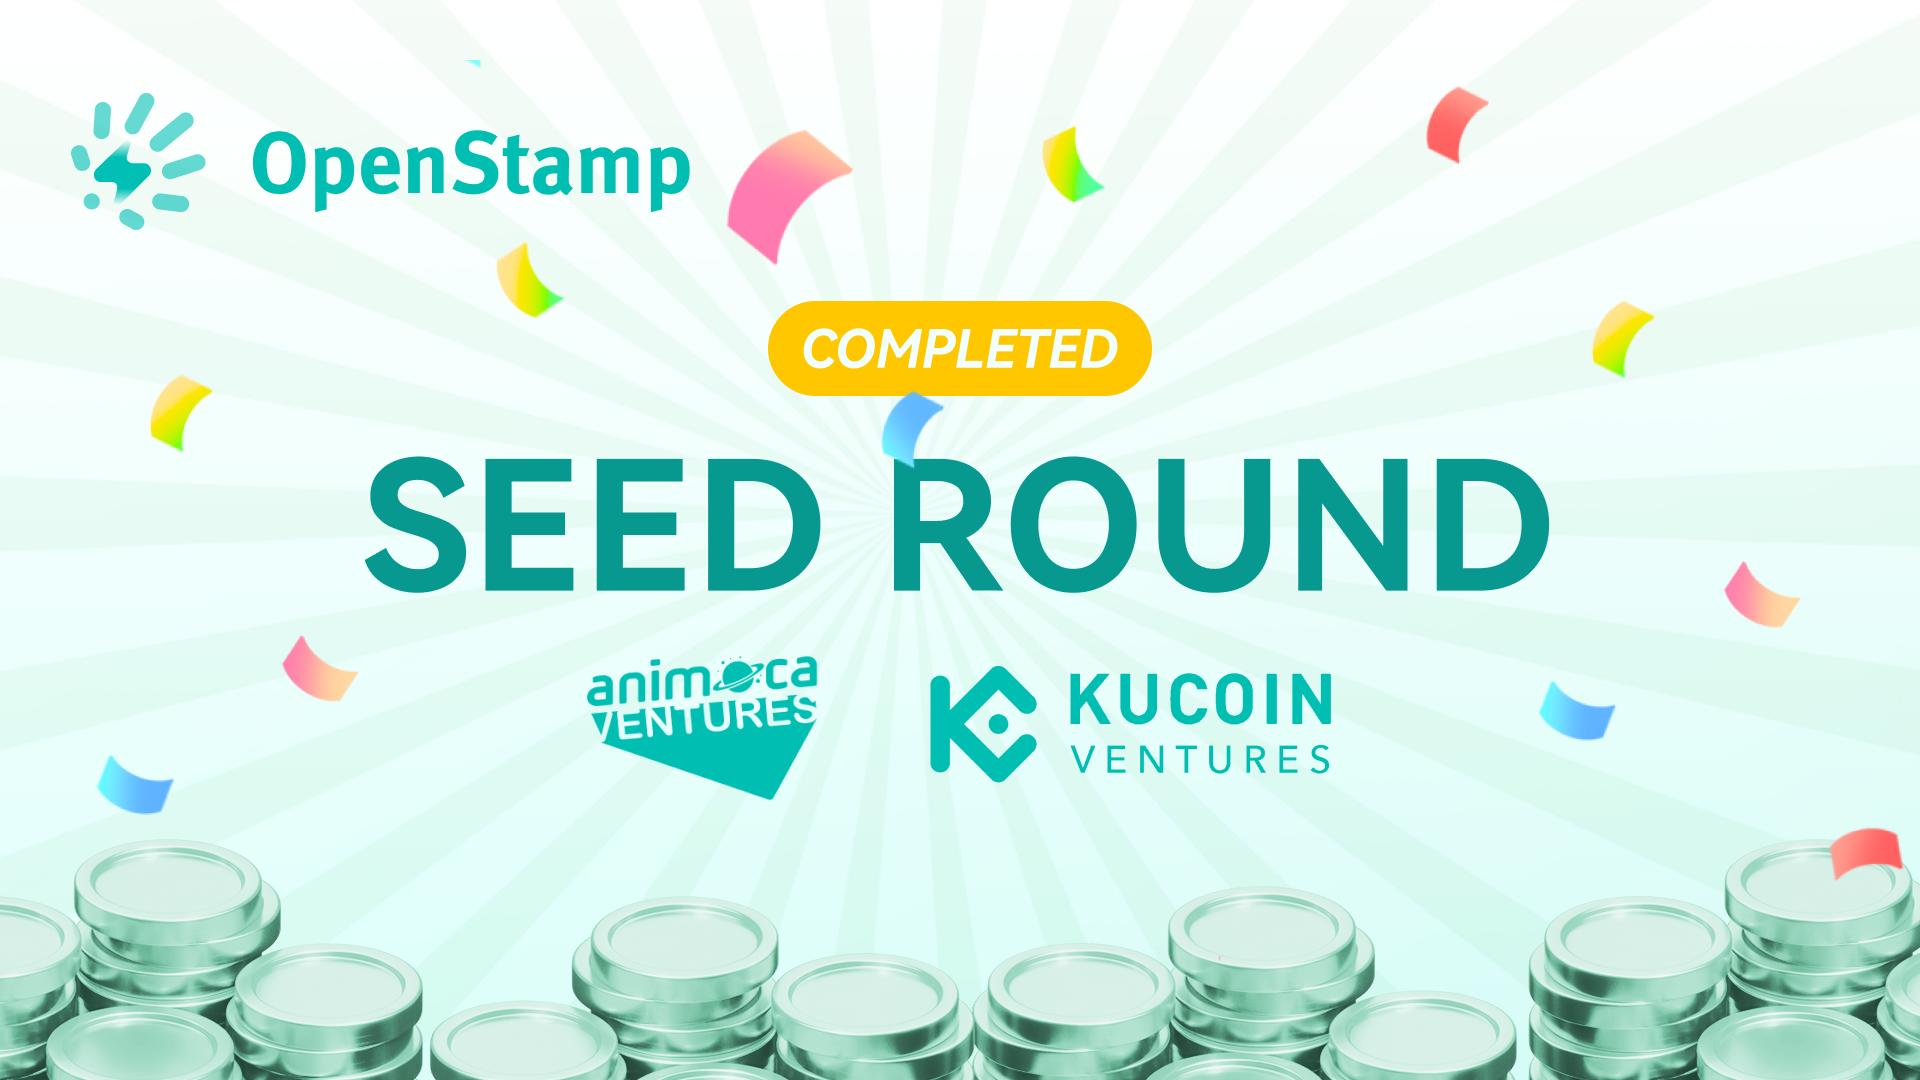 , OpenStamp Hits $50 Million Valuation in Seed Round Led by Animoca Ventures and KuCoin Ventures